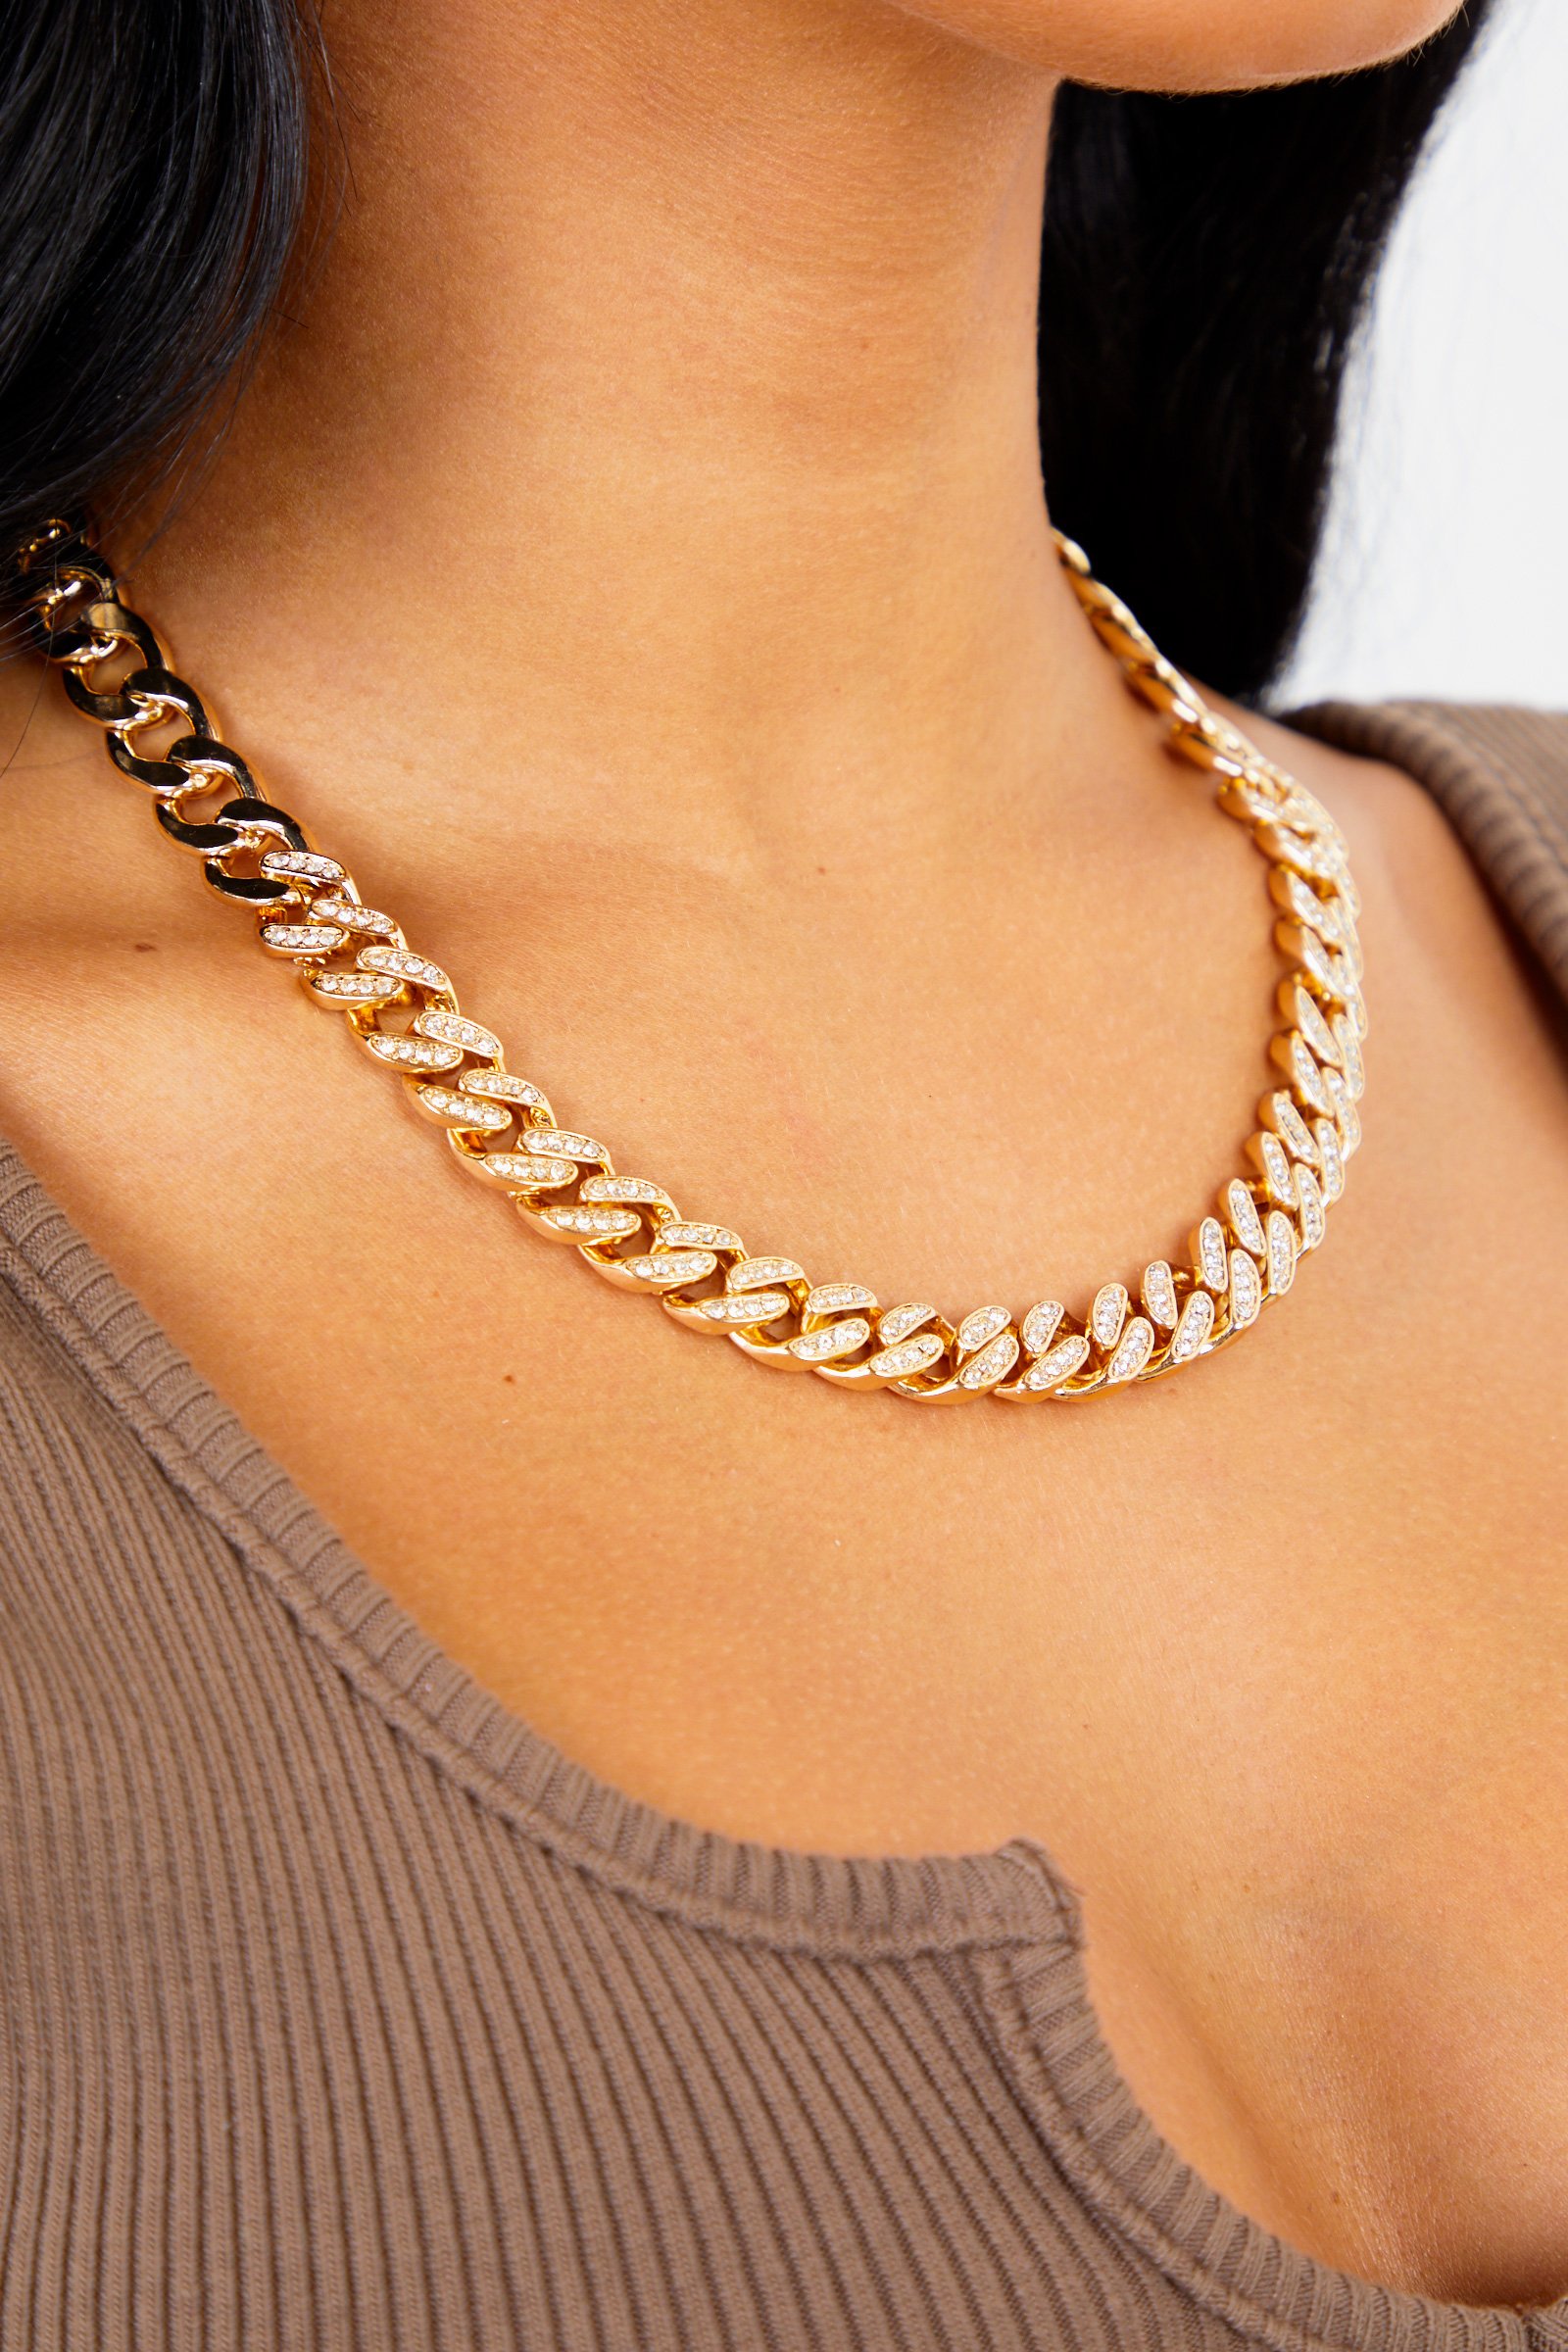 Uncover 5 Types Of Different Diamond Chains That Are Worth Buying! Read Out The Details Below!